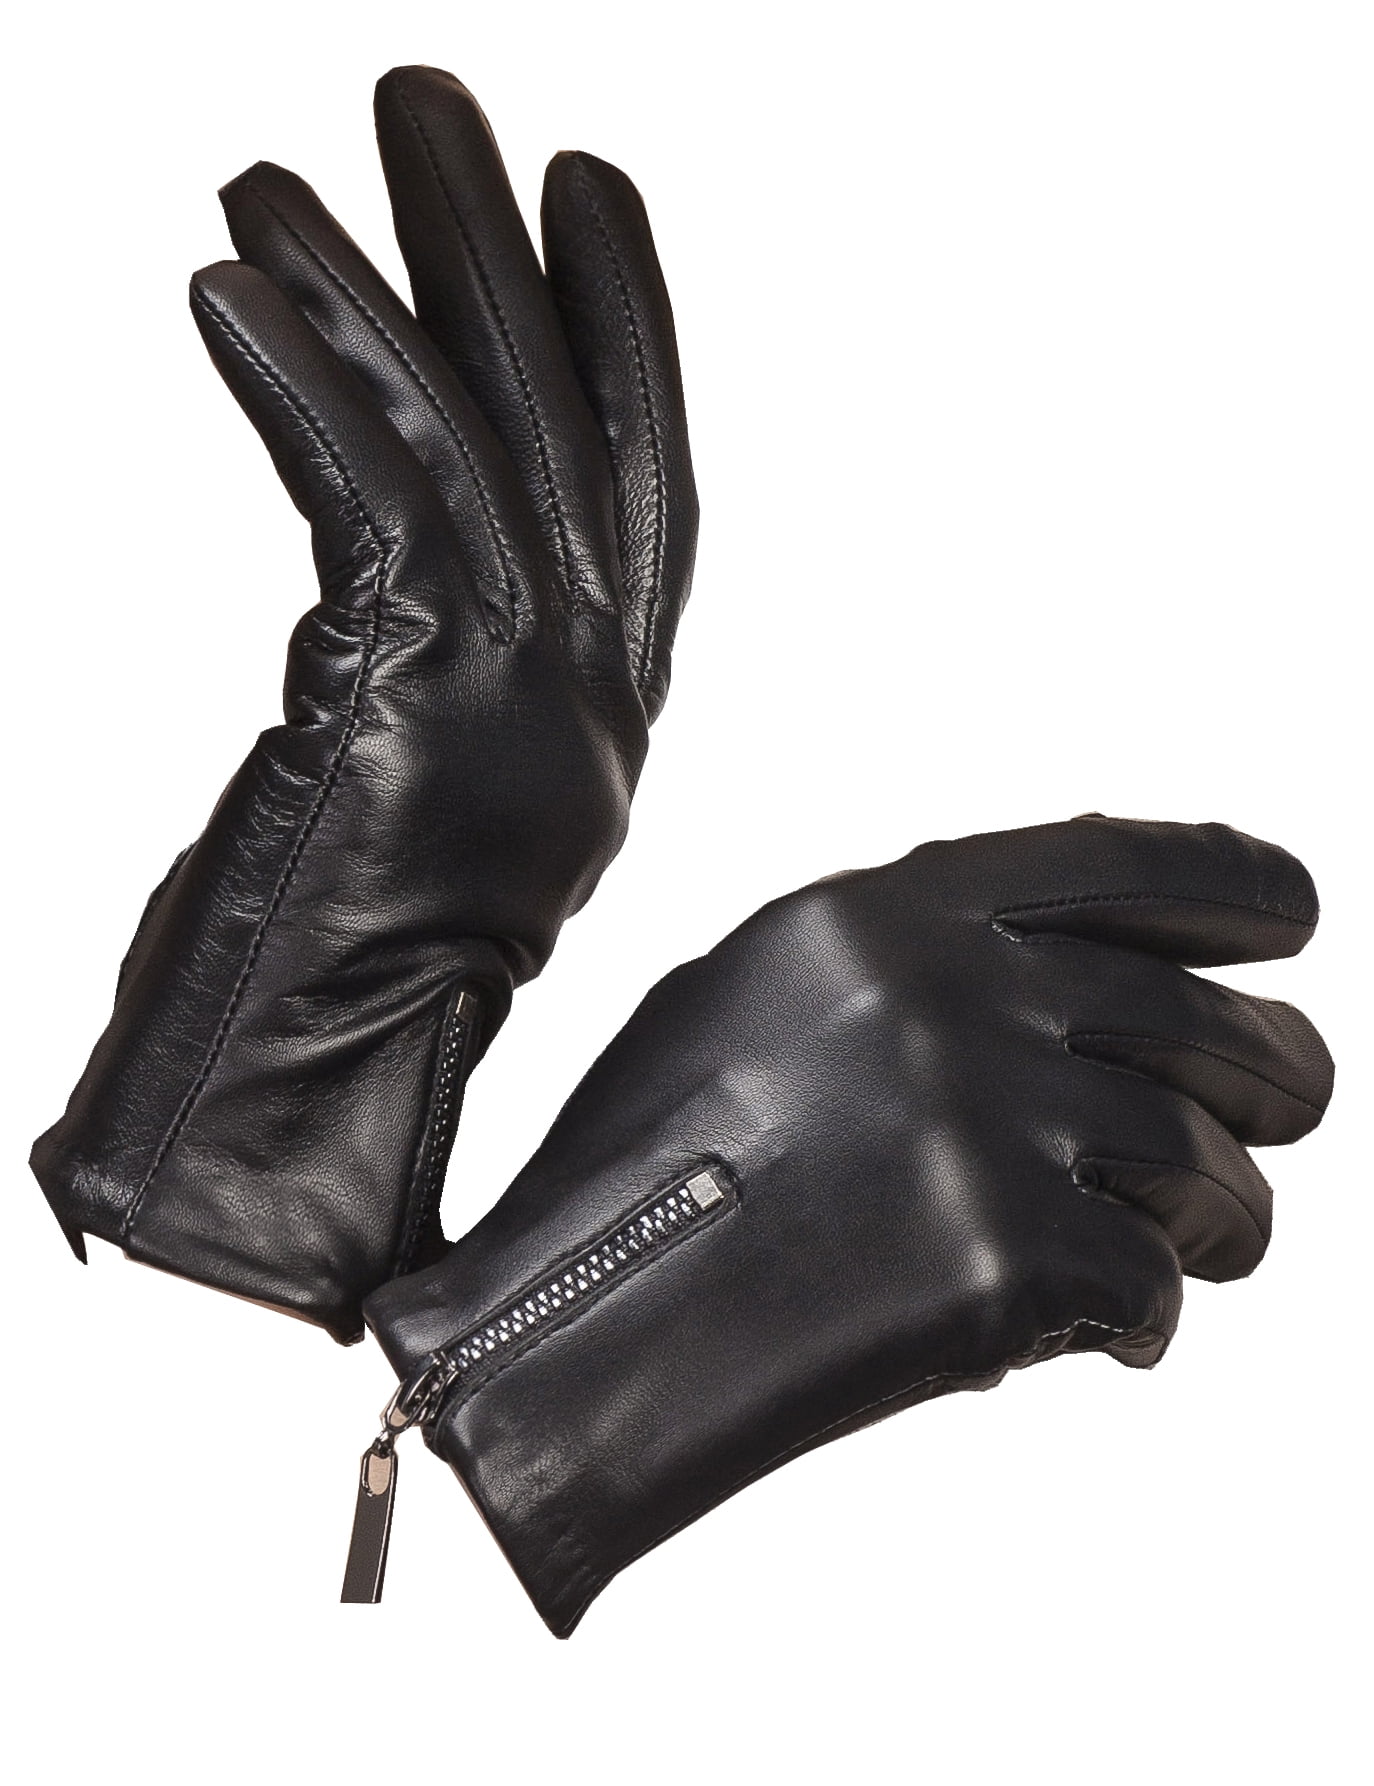 YISEVEN Women's Motorcycle Driving Fingerless Leather Gloves Unlined 